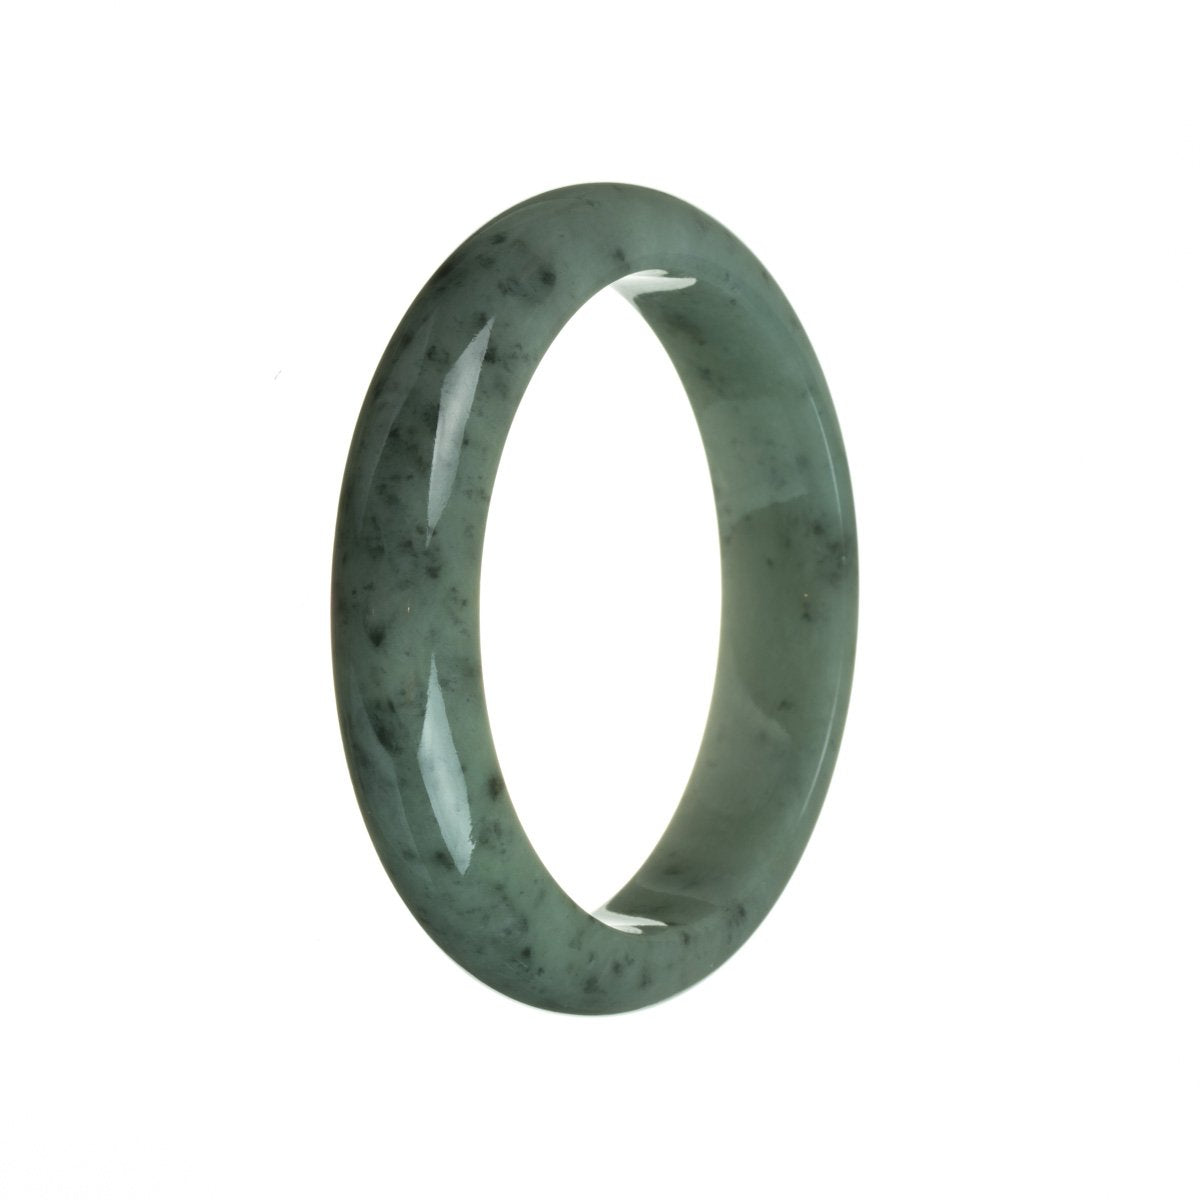 A close-up image of an exquisite jade bracelet made from Grade A Green Jadeite Jade. The bracelet features a semi-round shape with a diameter of 59mm. The jade stone has a vibrant green color and a smooth, polished surface. The bracelet is a product of MAYS™, known for their authentic and high-quality jade jewelry.